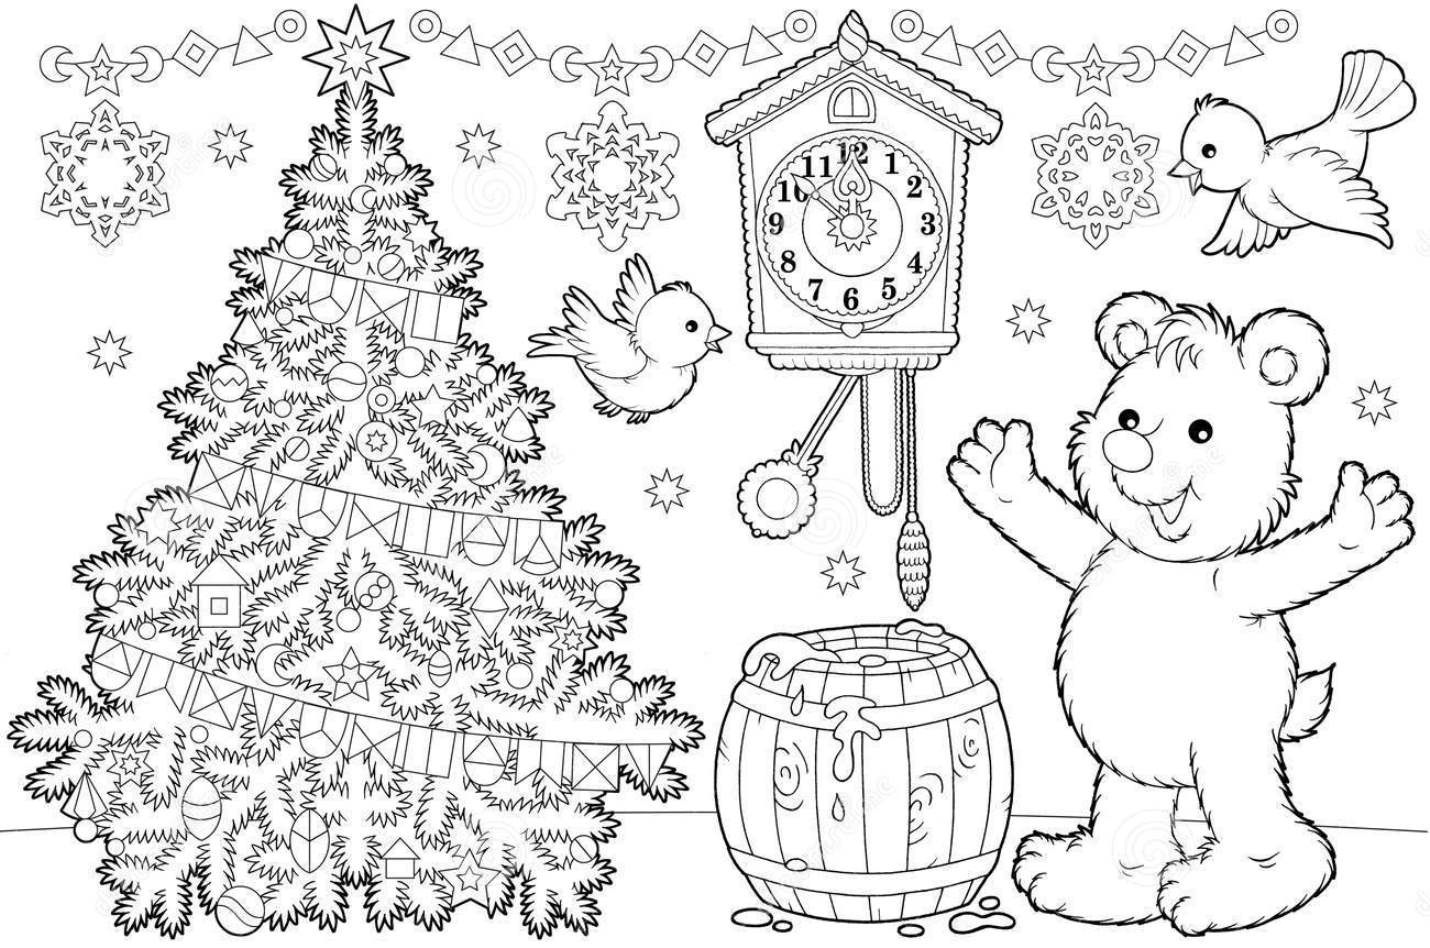 http://www.dreamstime.com/stock-photo-christmas-coloring-page-image14265270